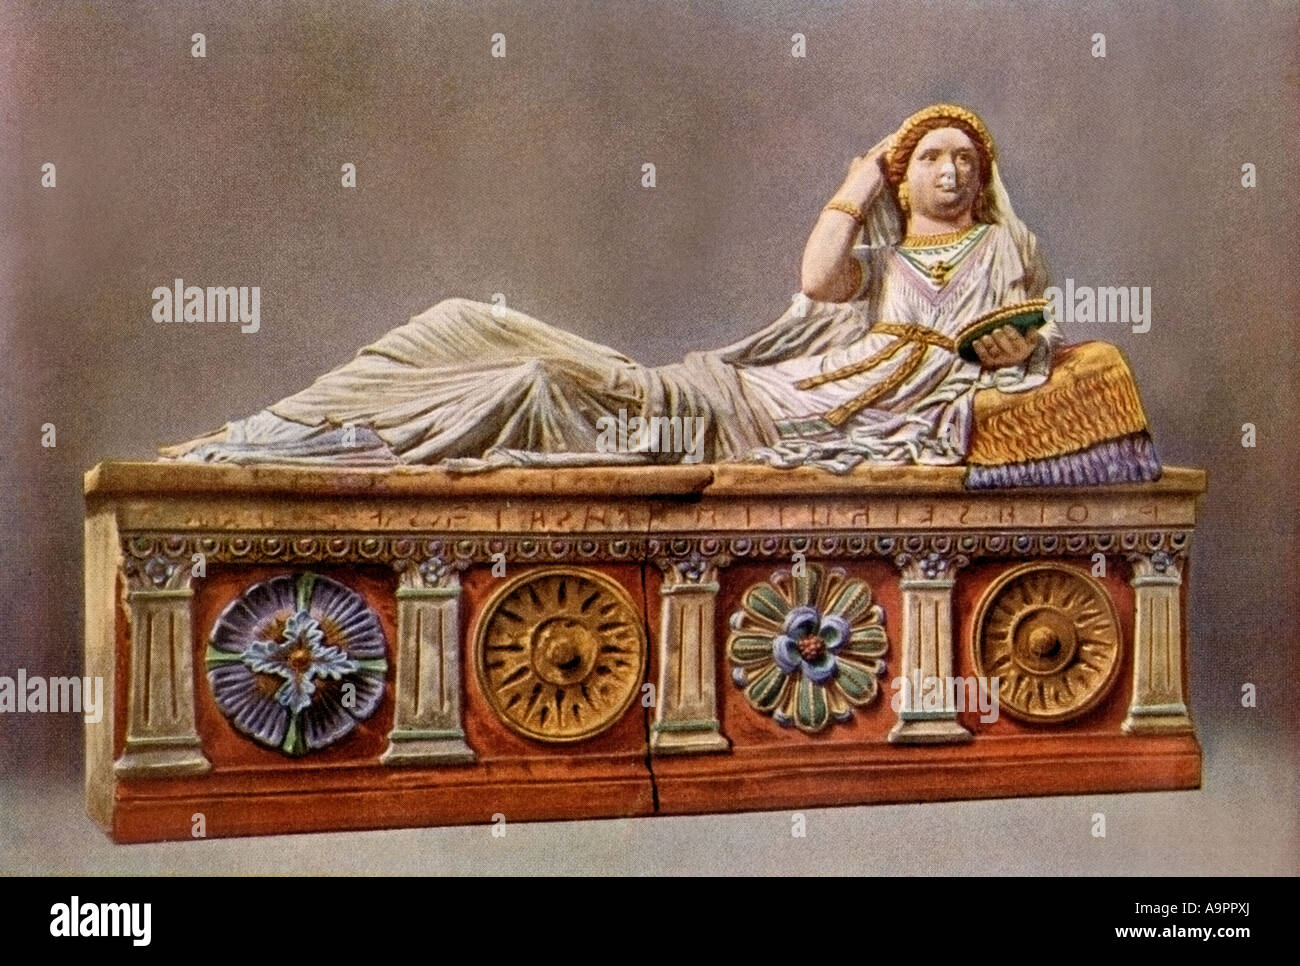 Etruscan sarcophagus with a single figure. Color halftone of a photograph Stock Photo